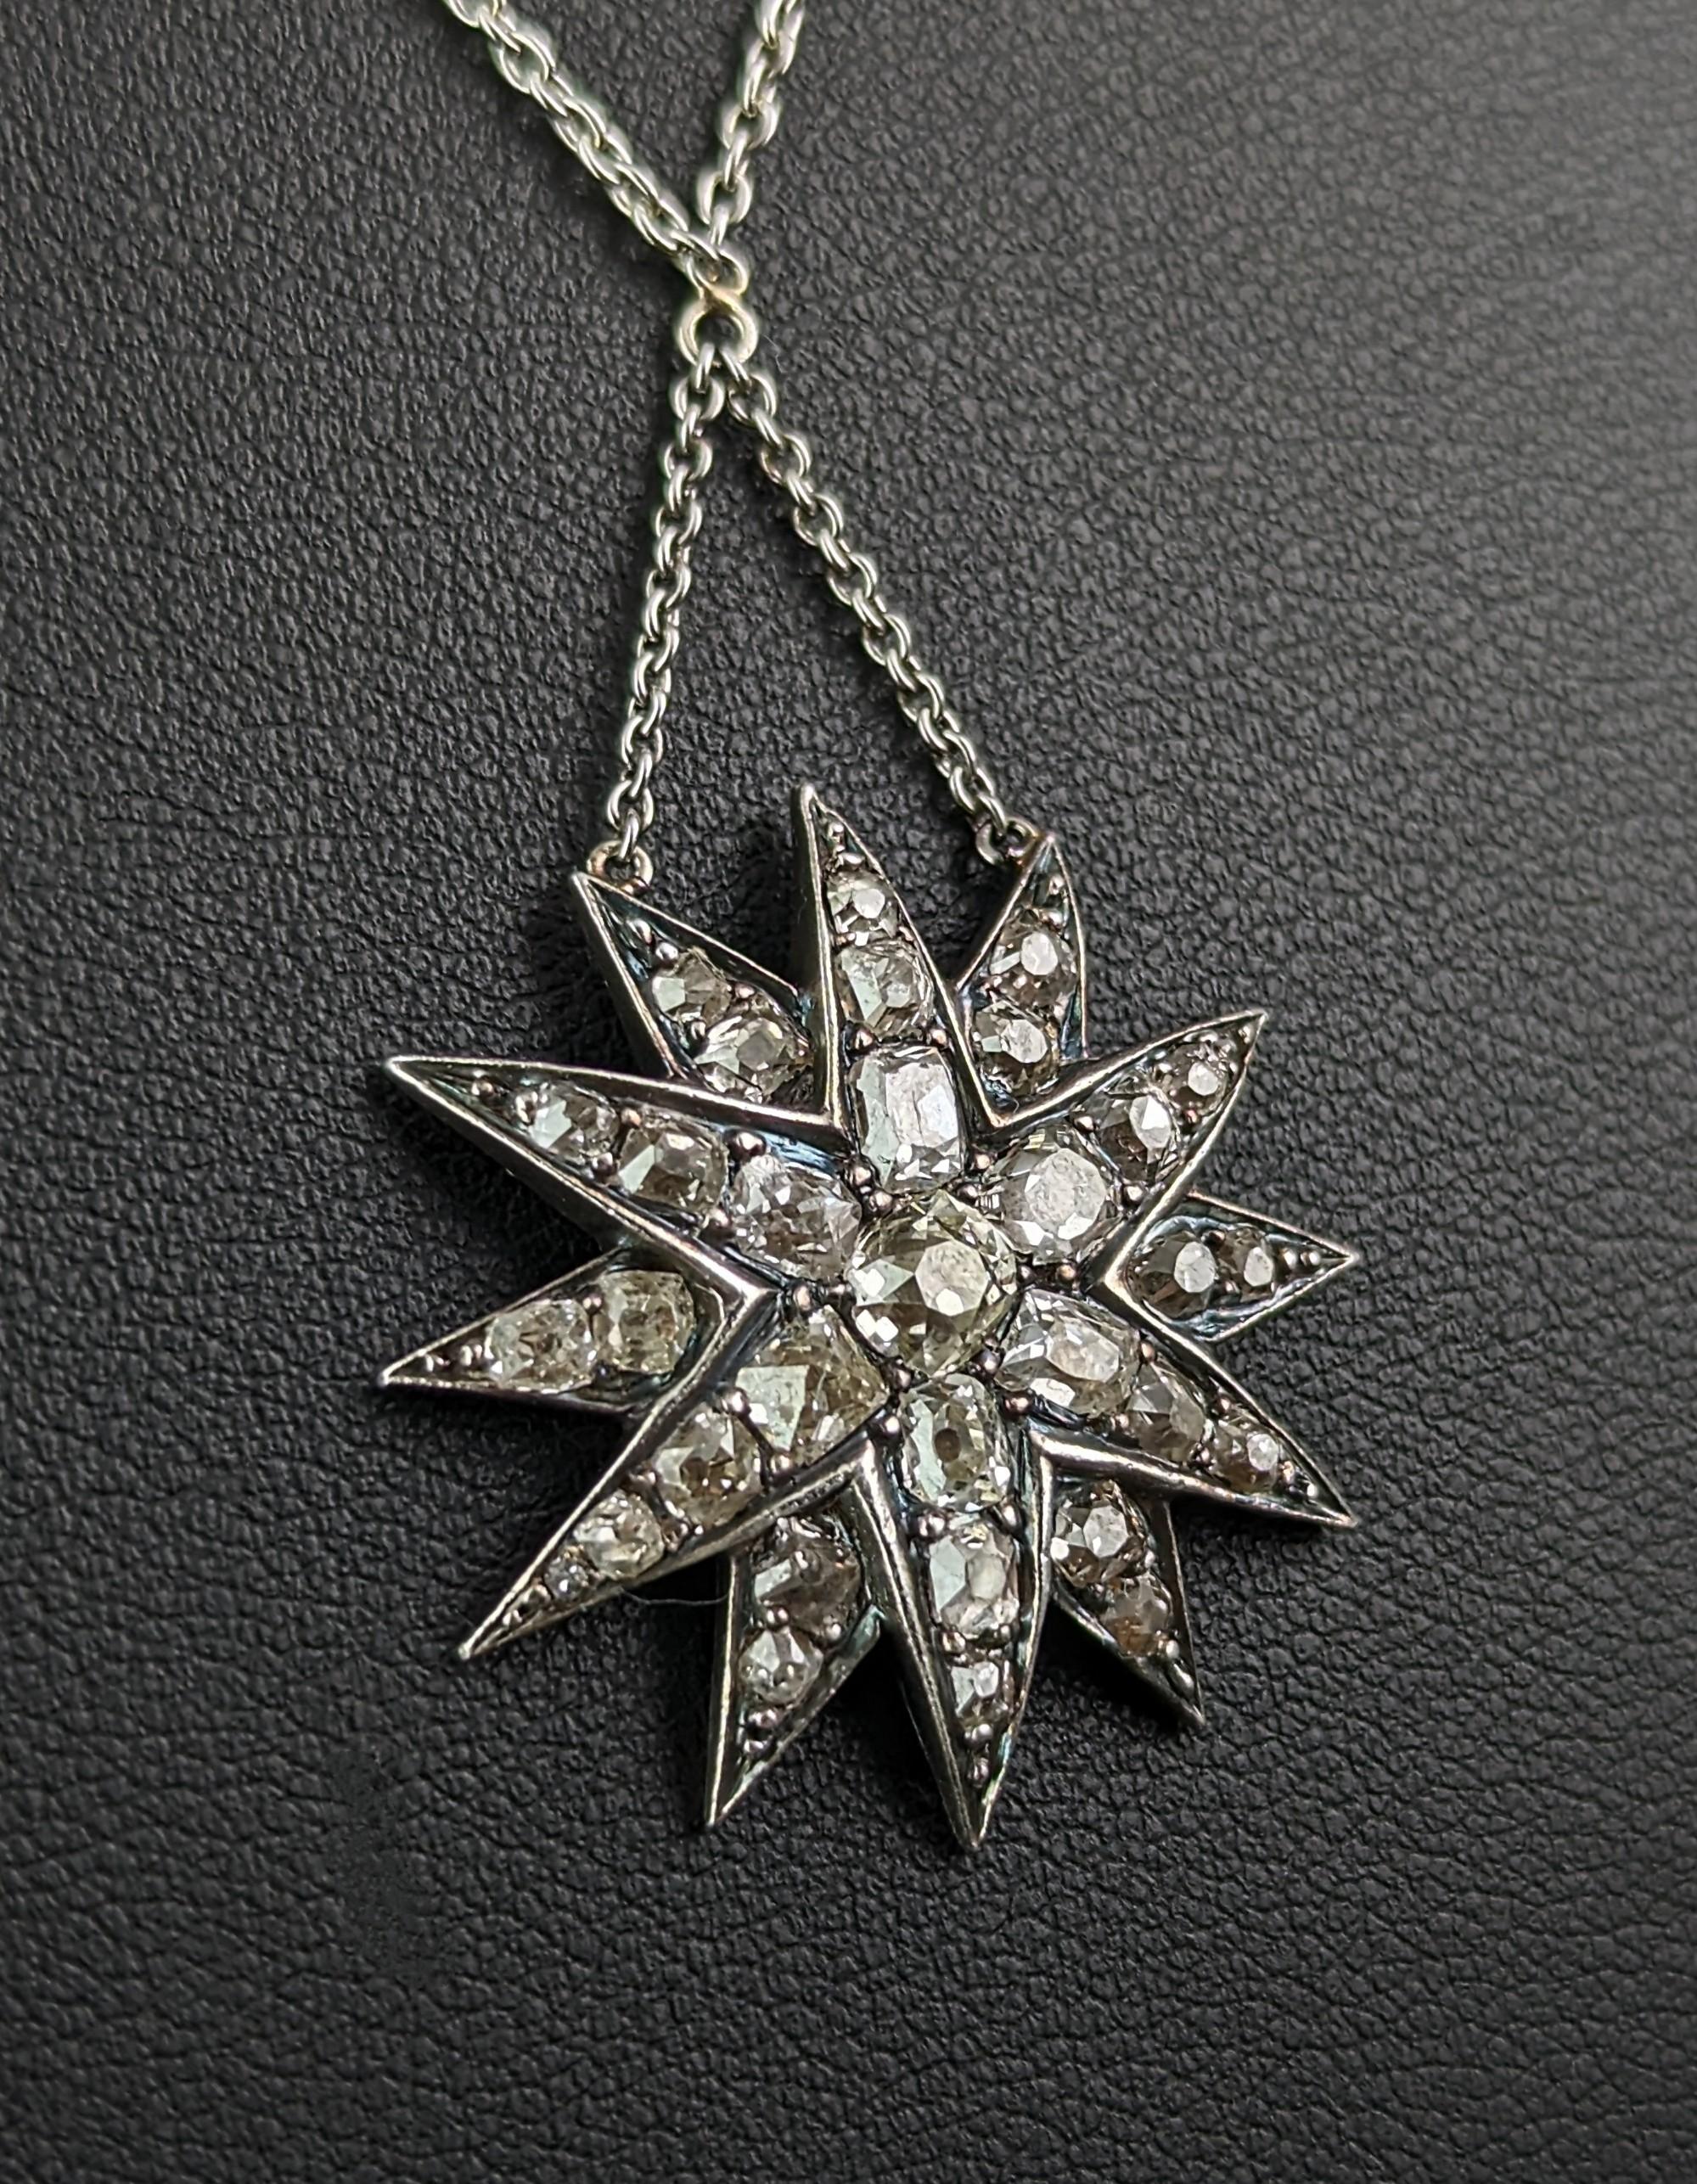 Antique Victorian Diamond star pendant, sterling silver necklace  For Sale 4